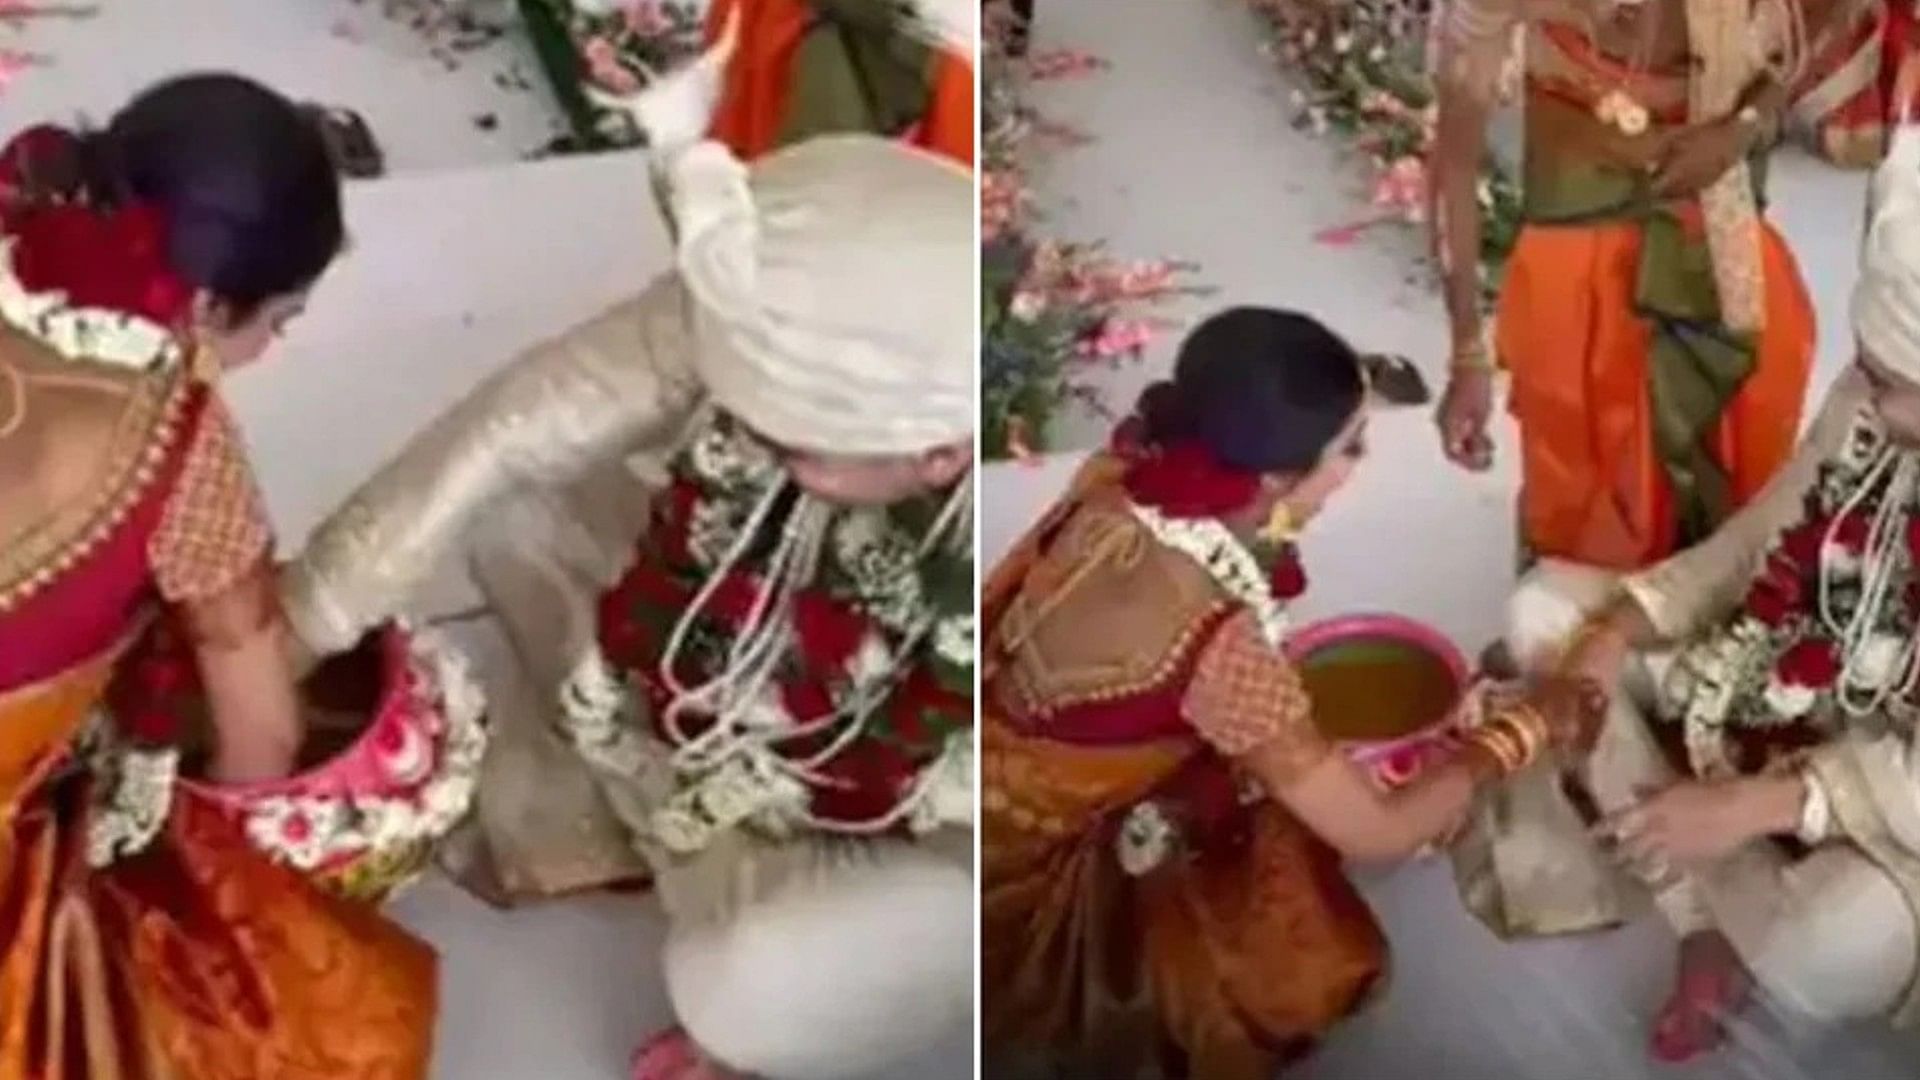 People laughed at this act of the bride and groom when they clashed during the wedding ceremony